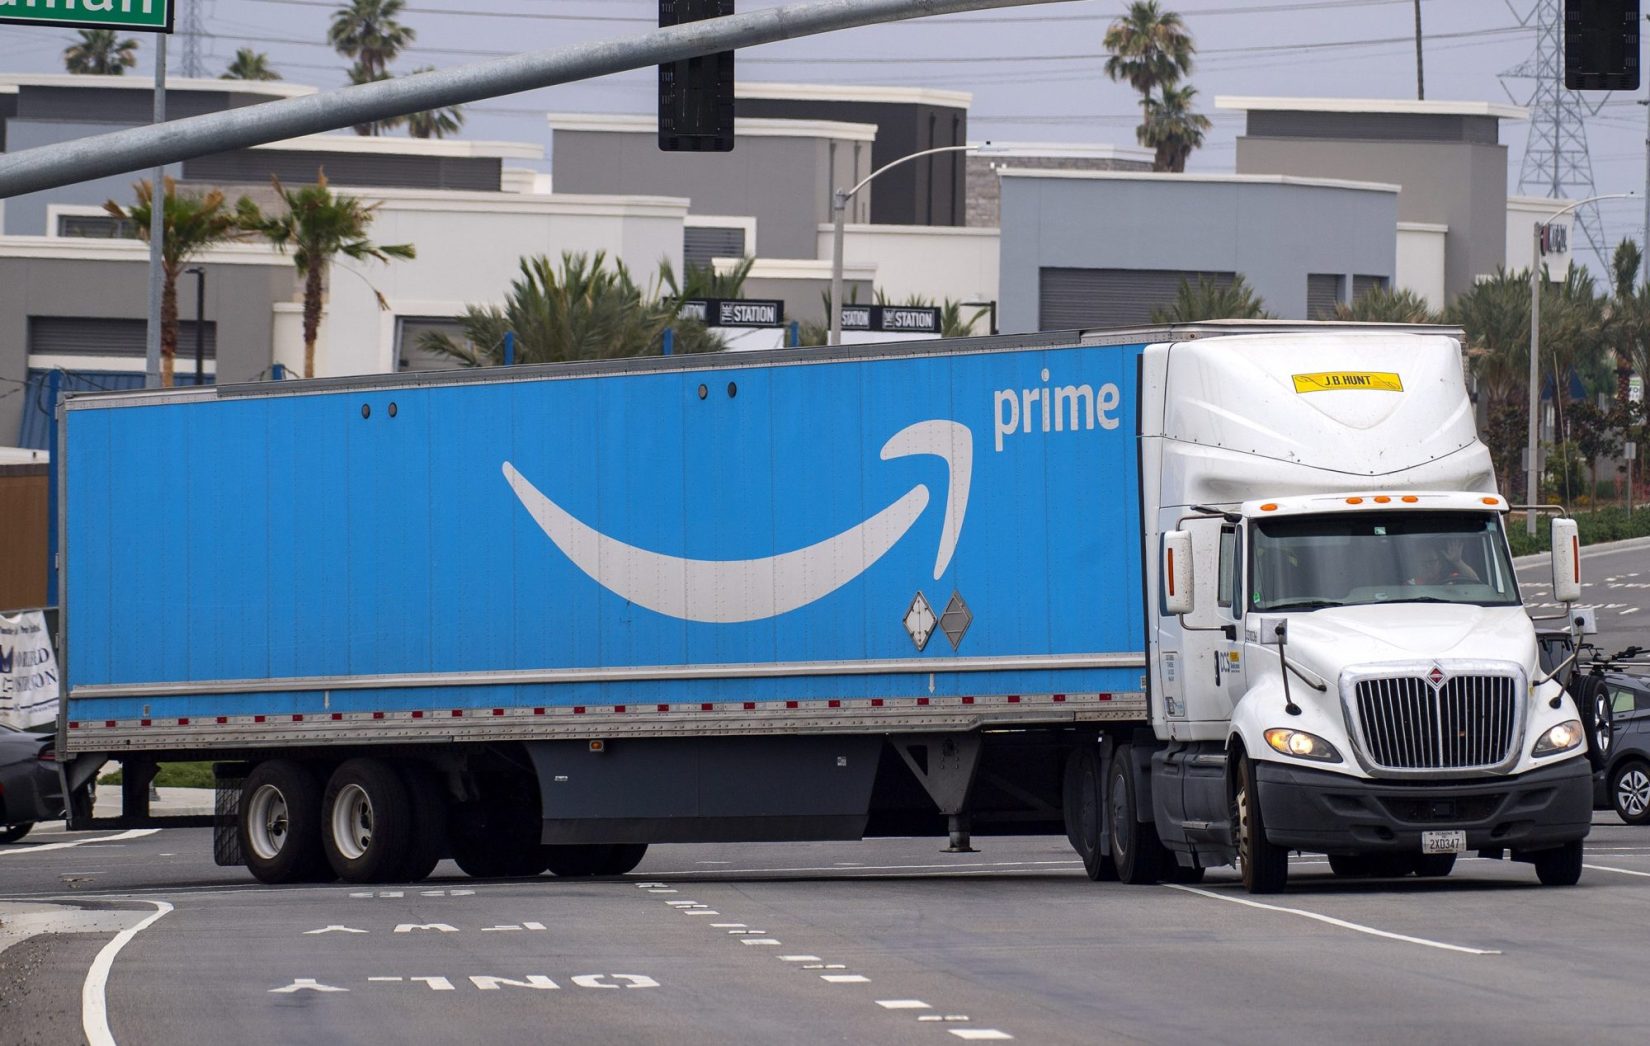 California says Amazon hid COVID outbreaks from workers, will pay $500,000